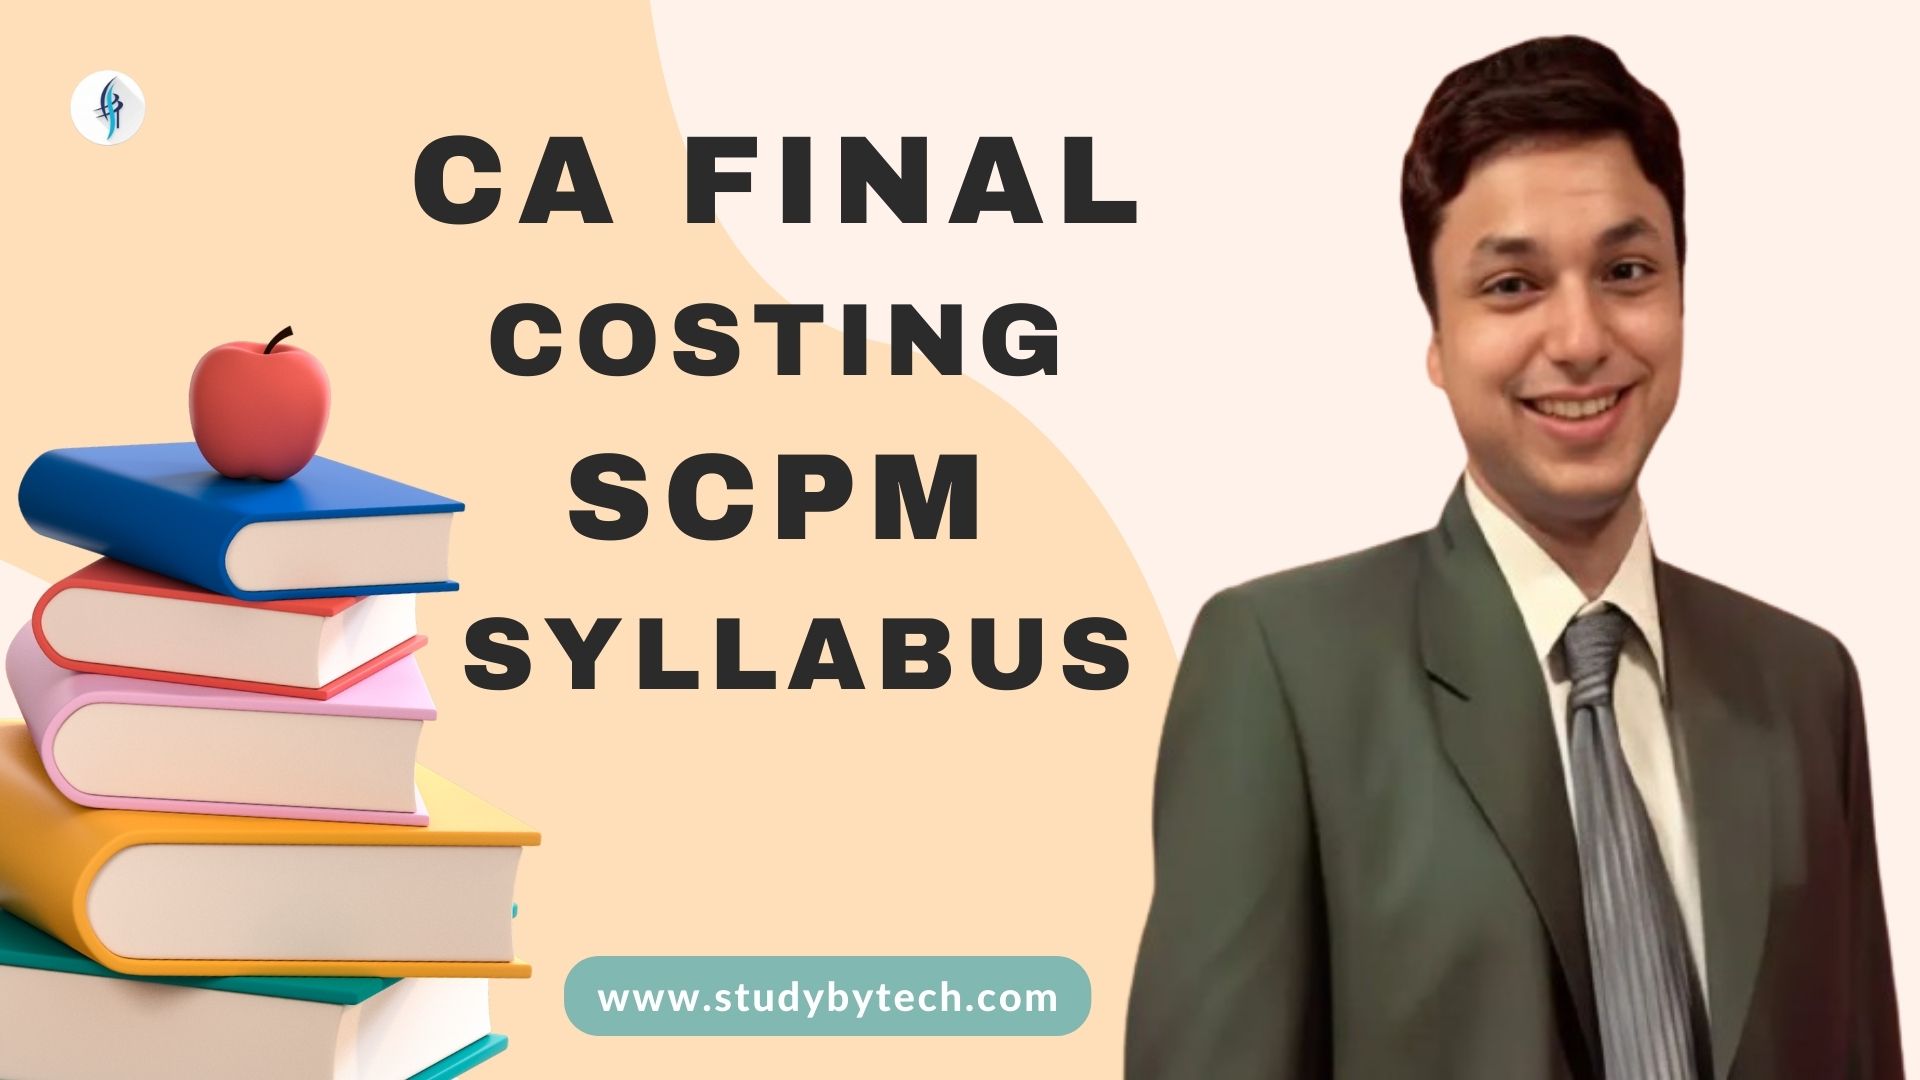 CA FINAl COSTING SCPM SYLLABUS